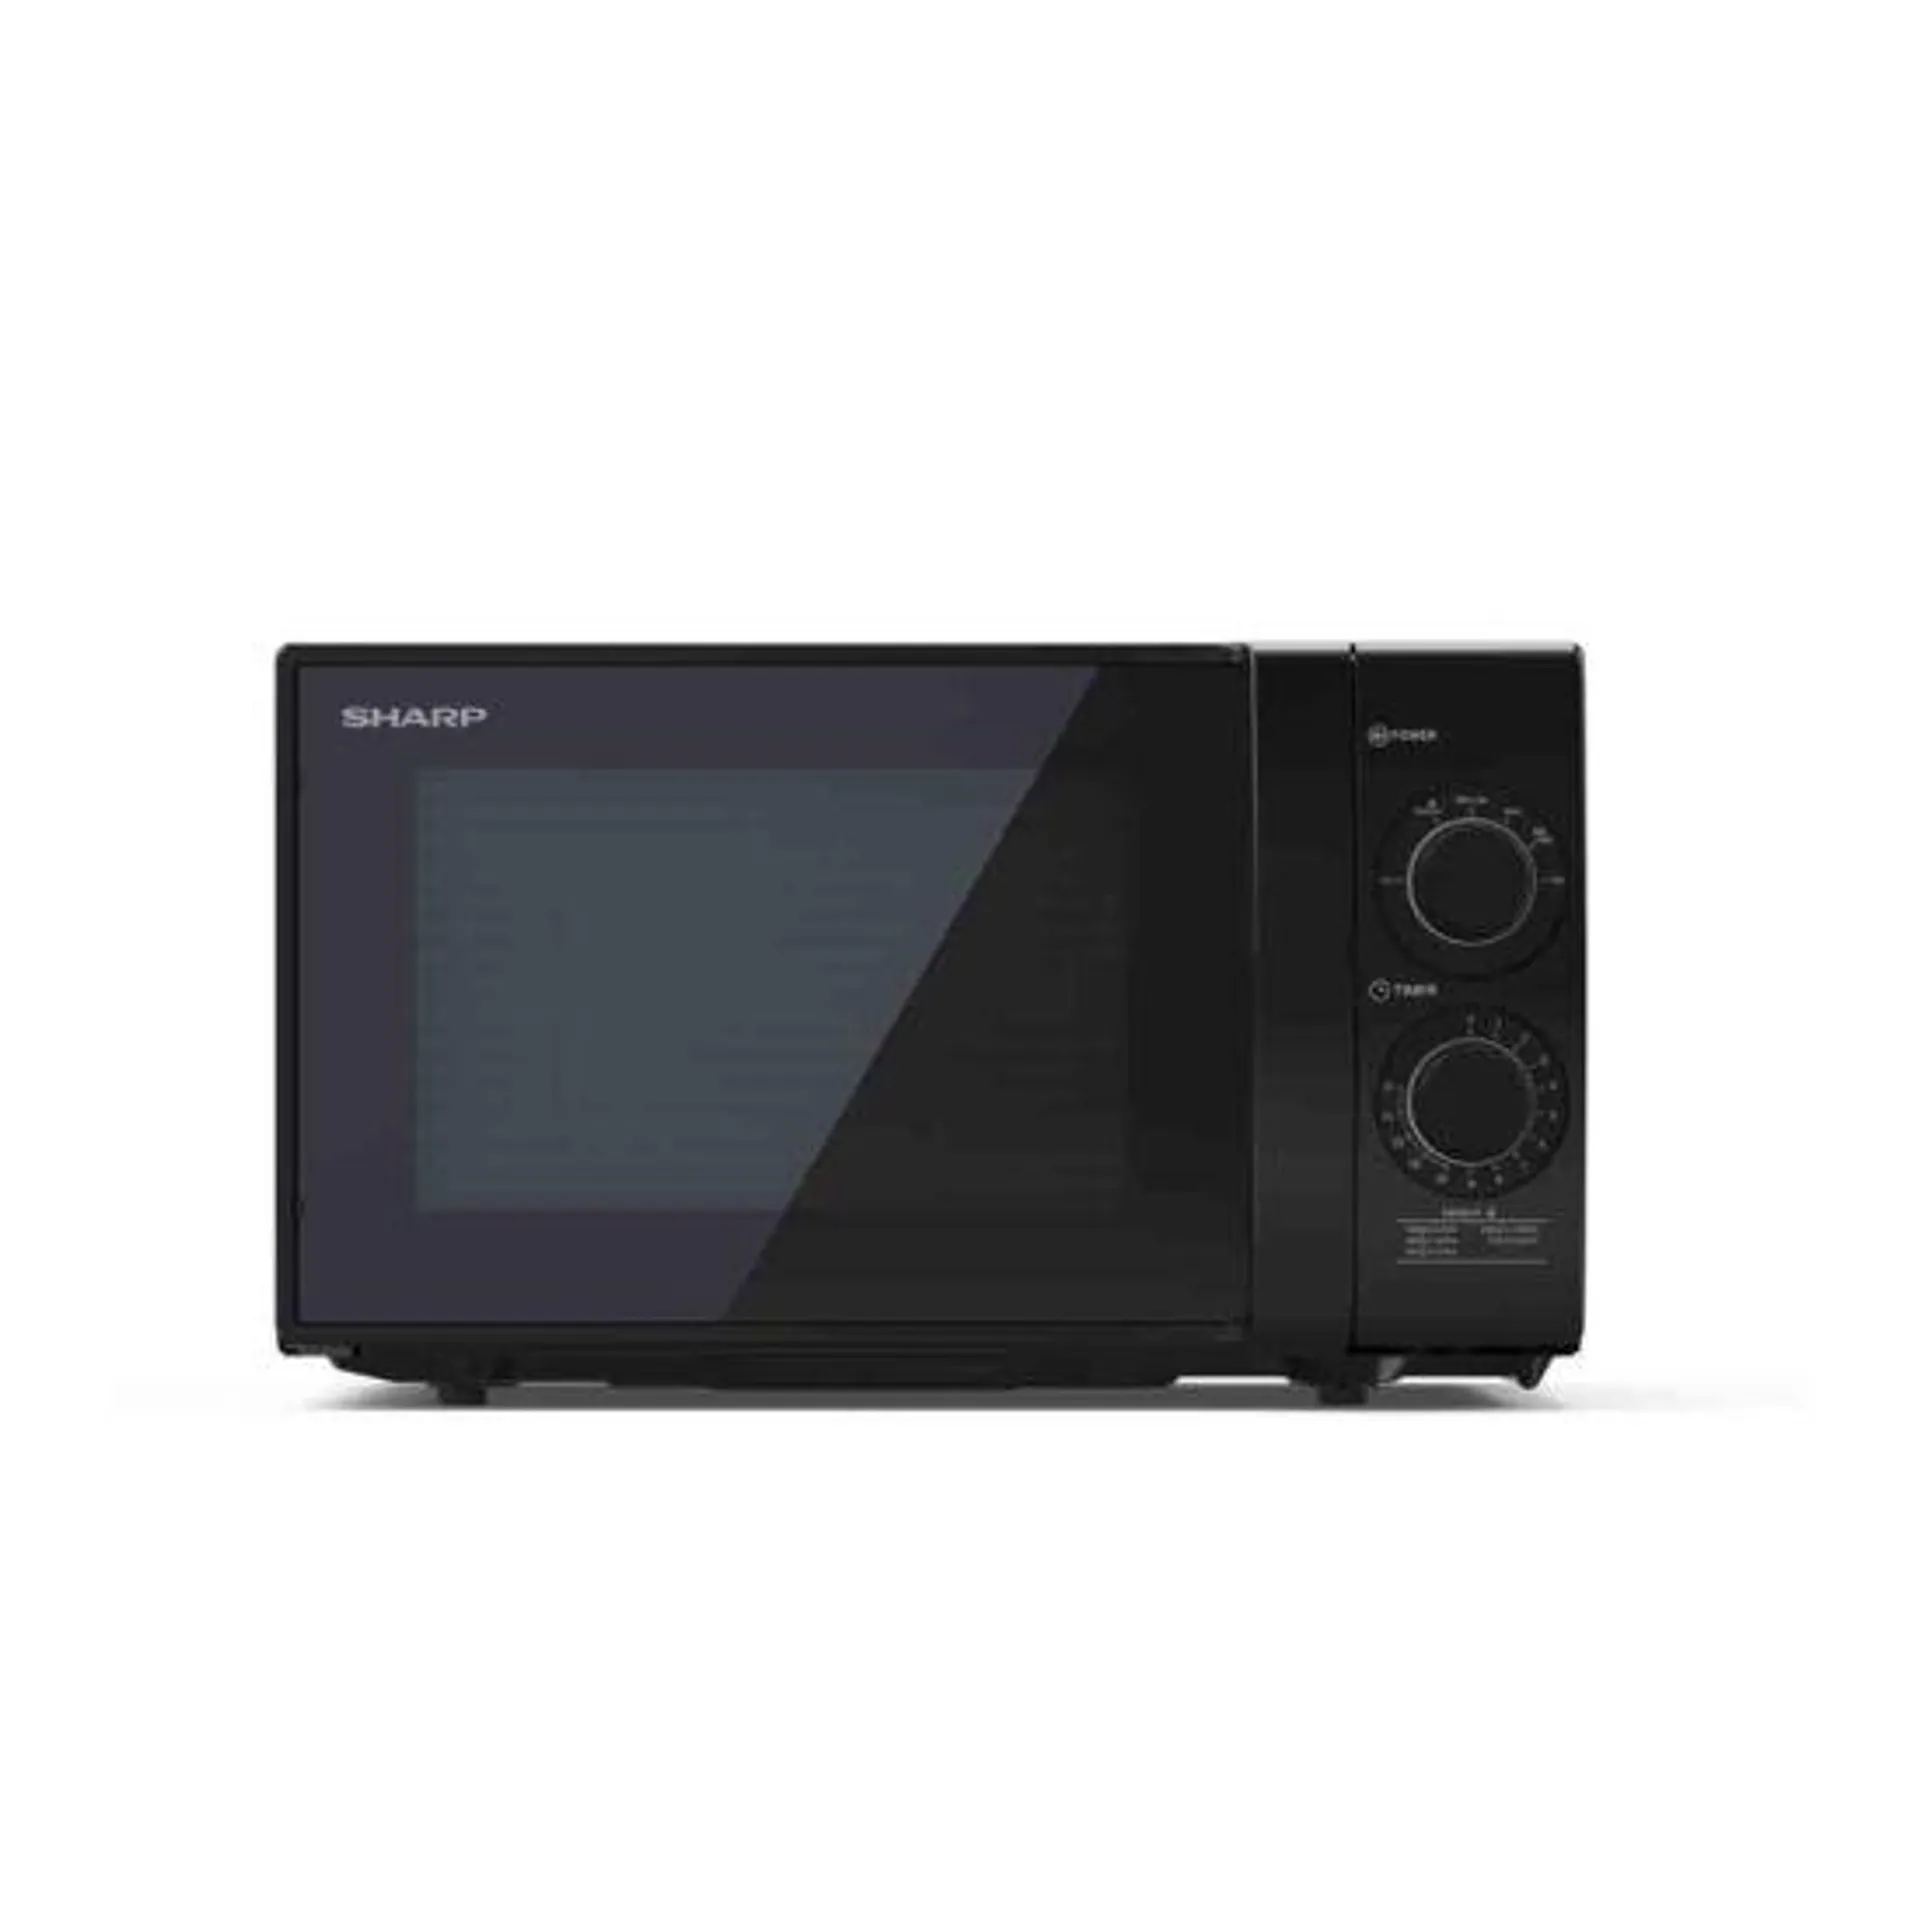 Sharp YC-GS01U-B 700W 20L Solo Microwave Oven With Defrost Function – Black